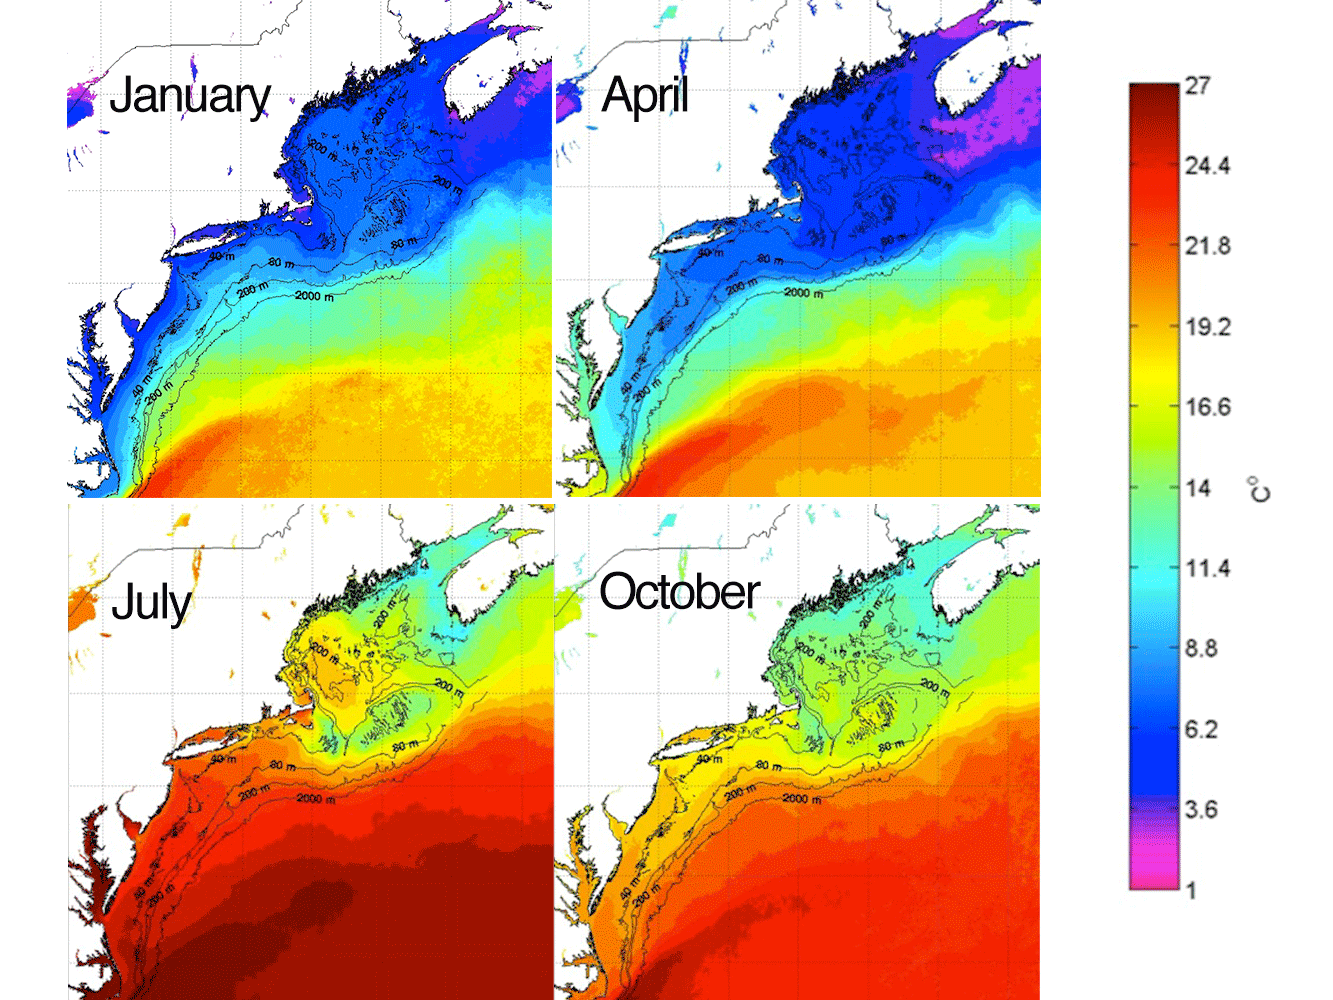 These satellite images show the temperature at the sea surface during 4 different months of the year.